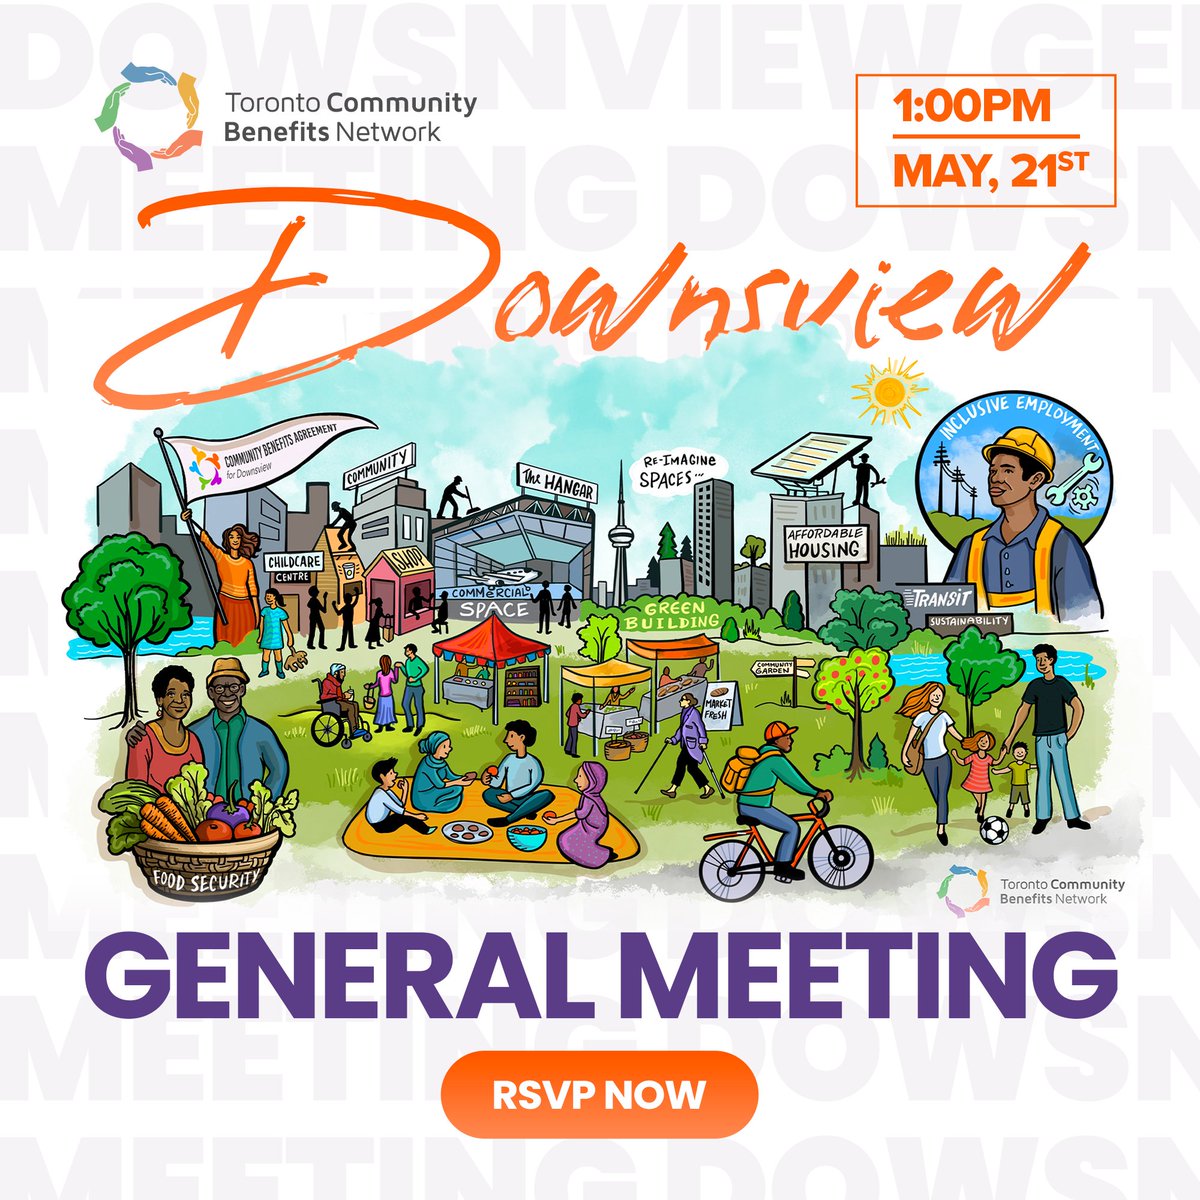 Join TCBN for our Downsview General Meeting and launch of our Community Benefits Vision Report

When: May 21, 1 PM
Where: Online and In-person. 2 Champagne Drive, Toronto

To learn more and RSVP, please visit communitybenefits.ca/tcbn_downsview…

#communitybenefits #downsview #cityoftoronto